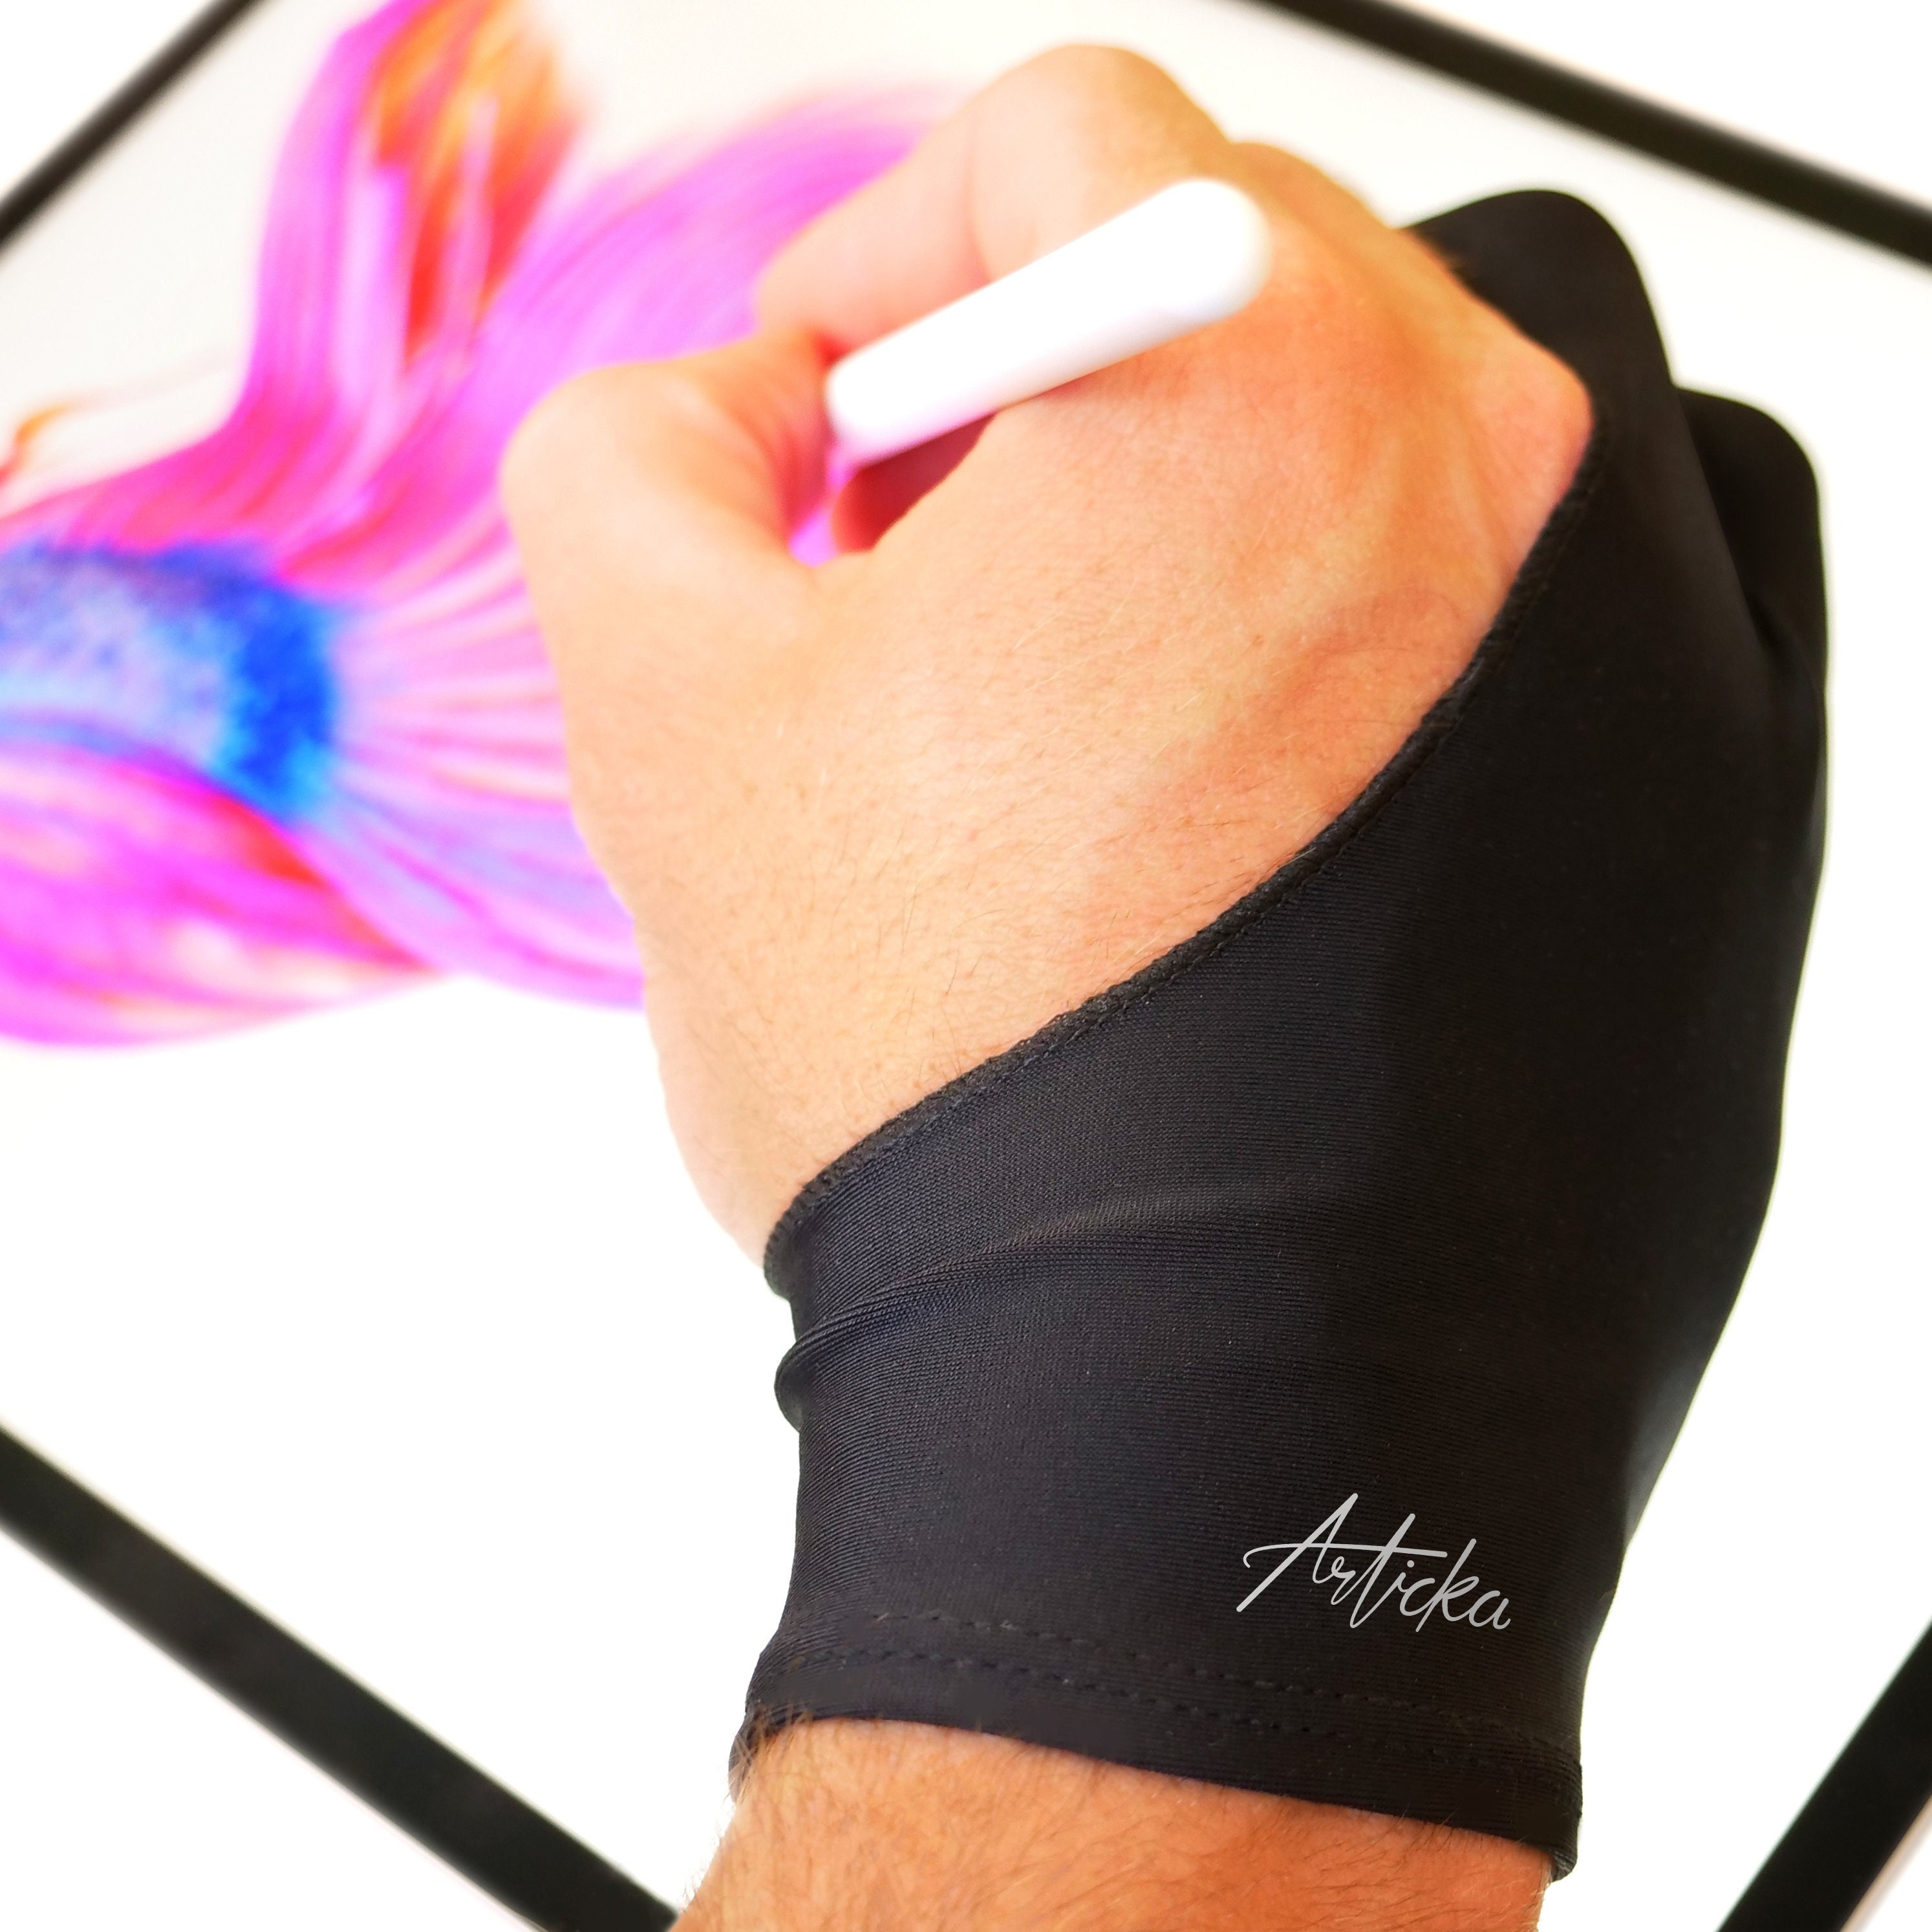 2 Fingers Drawing Glove Anti-fouling Artist Favor Any Graphics Painting  Writing Digital Ablet For Right